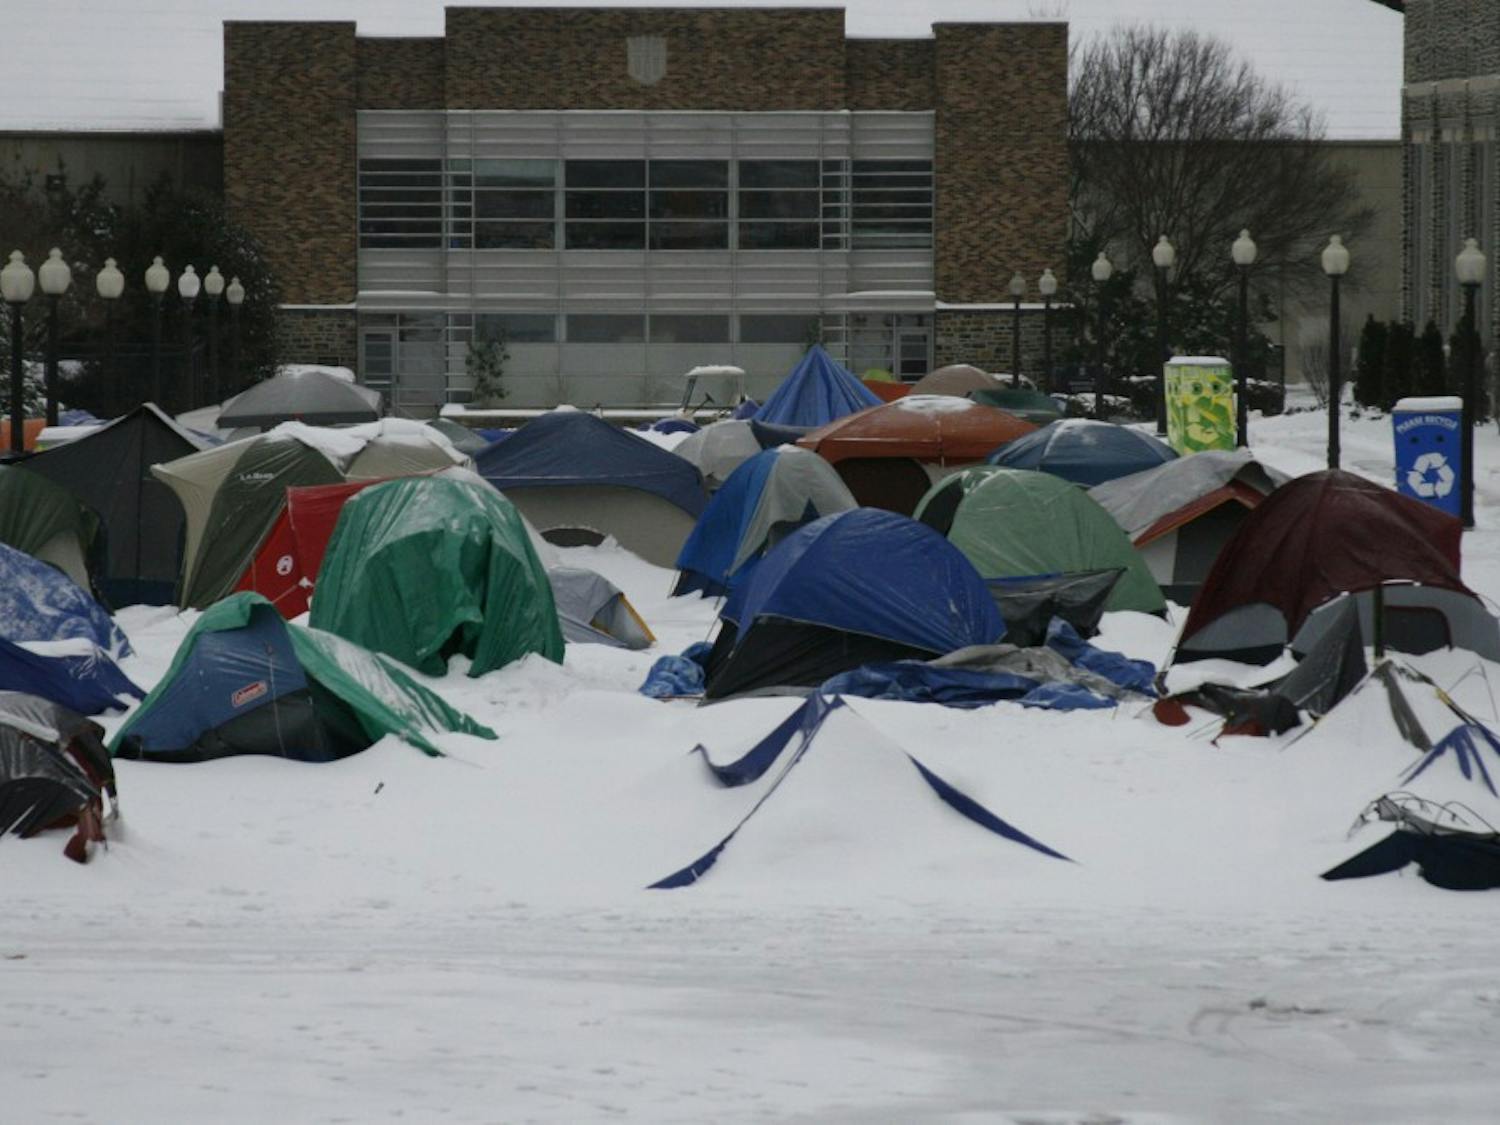 The newly pitched tents of the Cameron Crazies were buried in snow from the storm that hit Duke's campus on Saturday, January 30, 2010. 